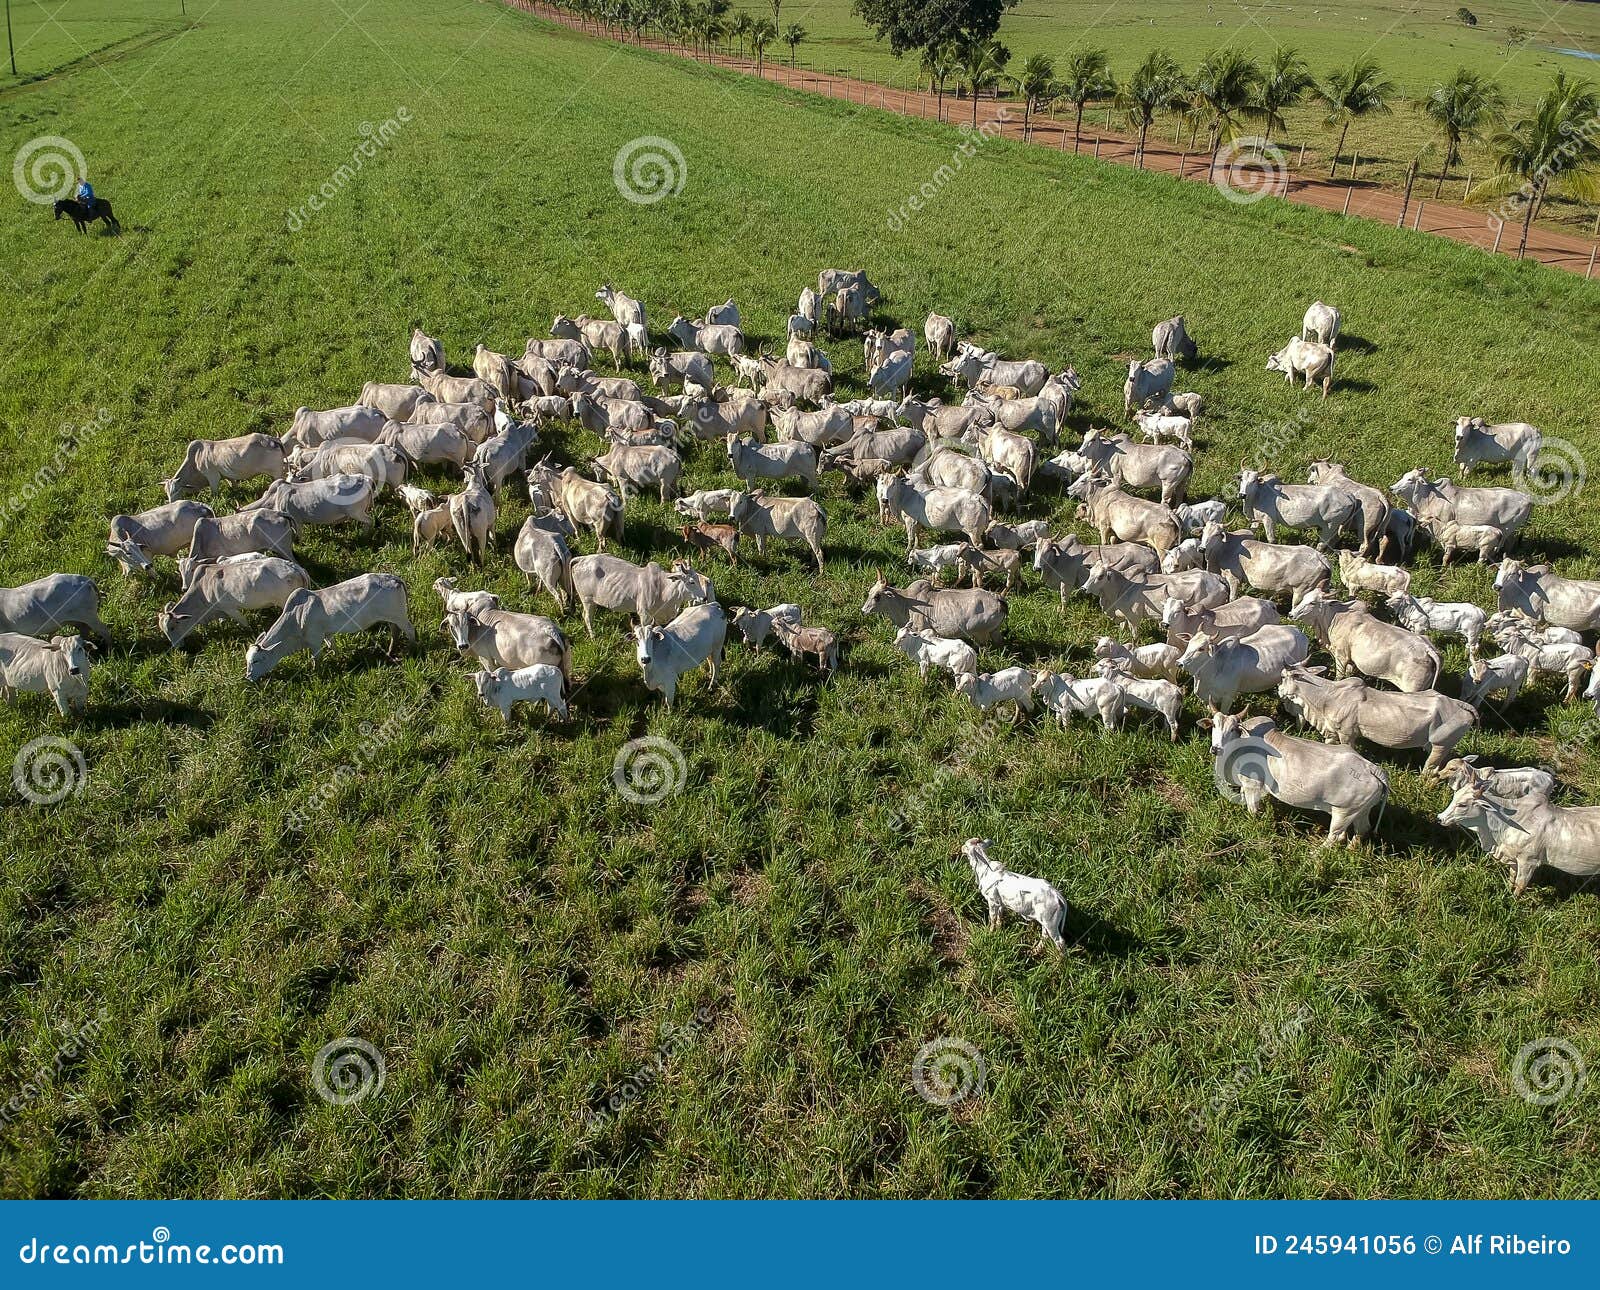 top view of nellore cattle herd on green pasture